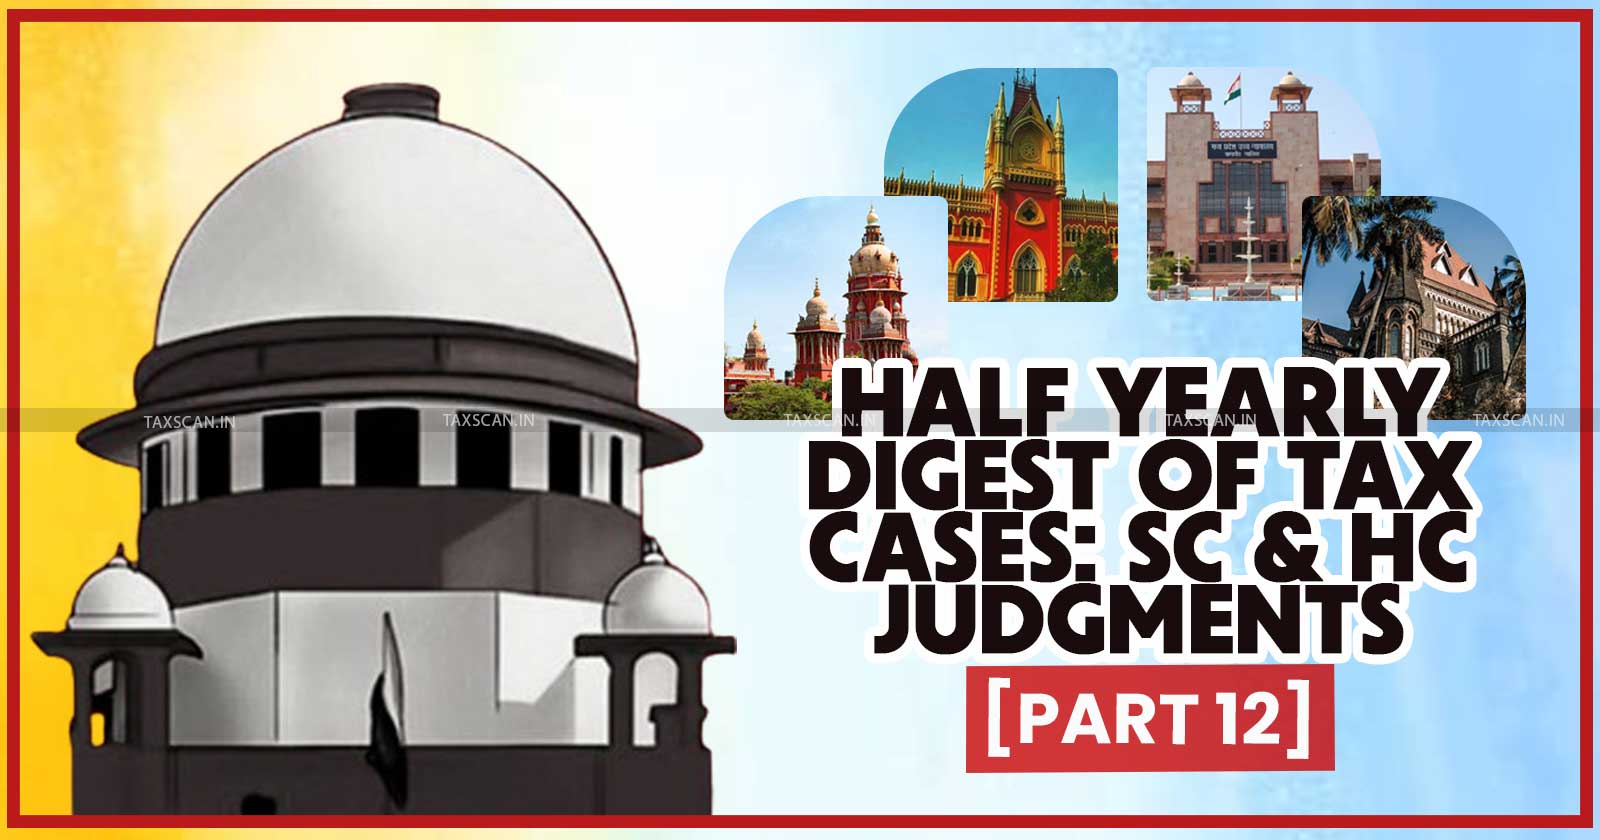 Half Yearly Digest - Tax Cases - Supreme Court - High Court Judgments - taxscan